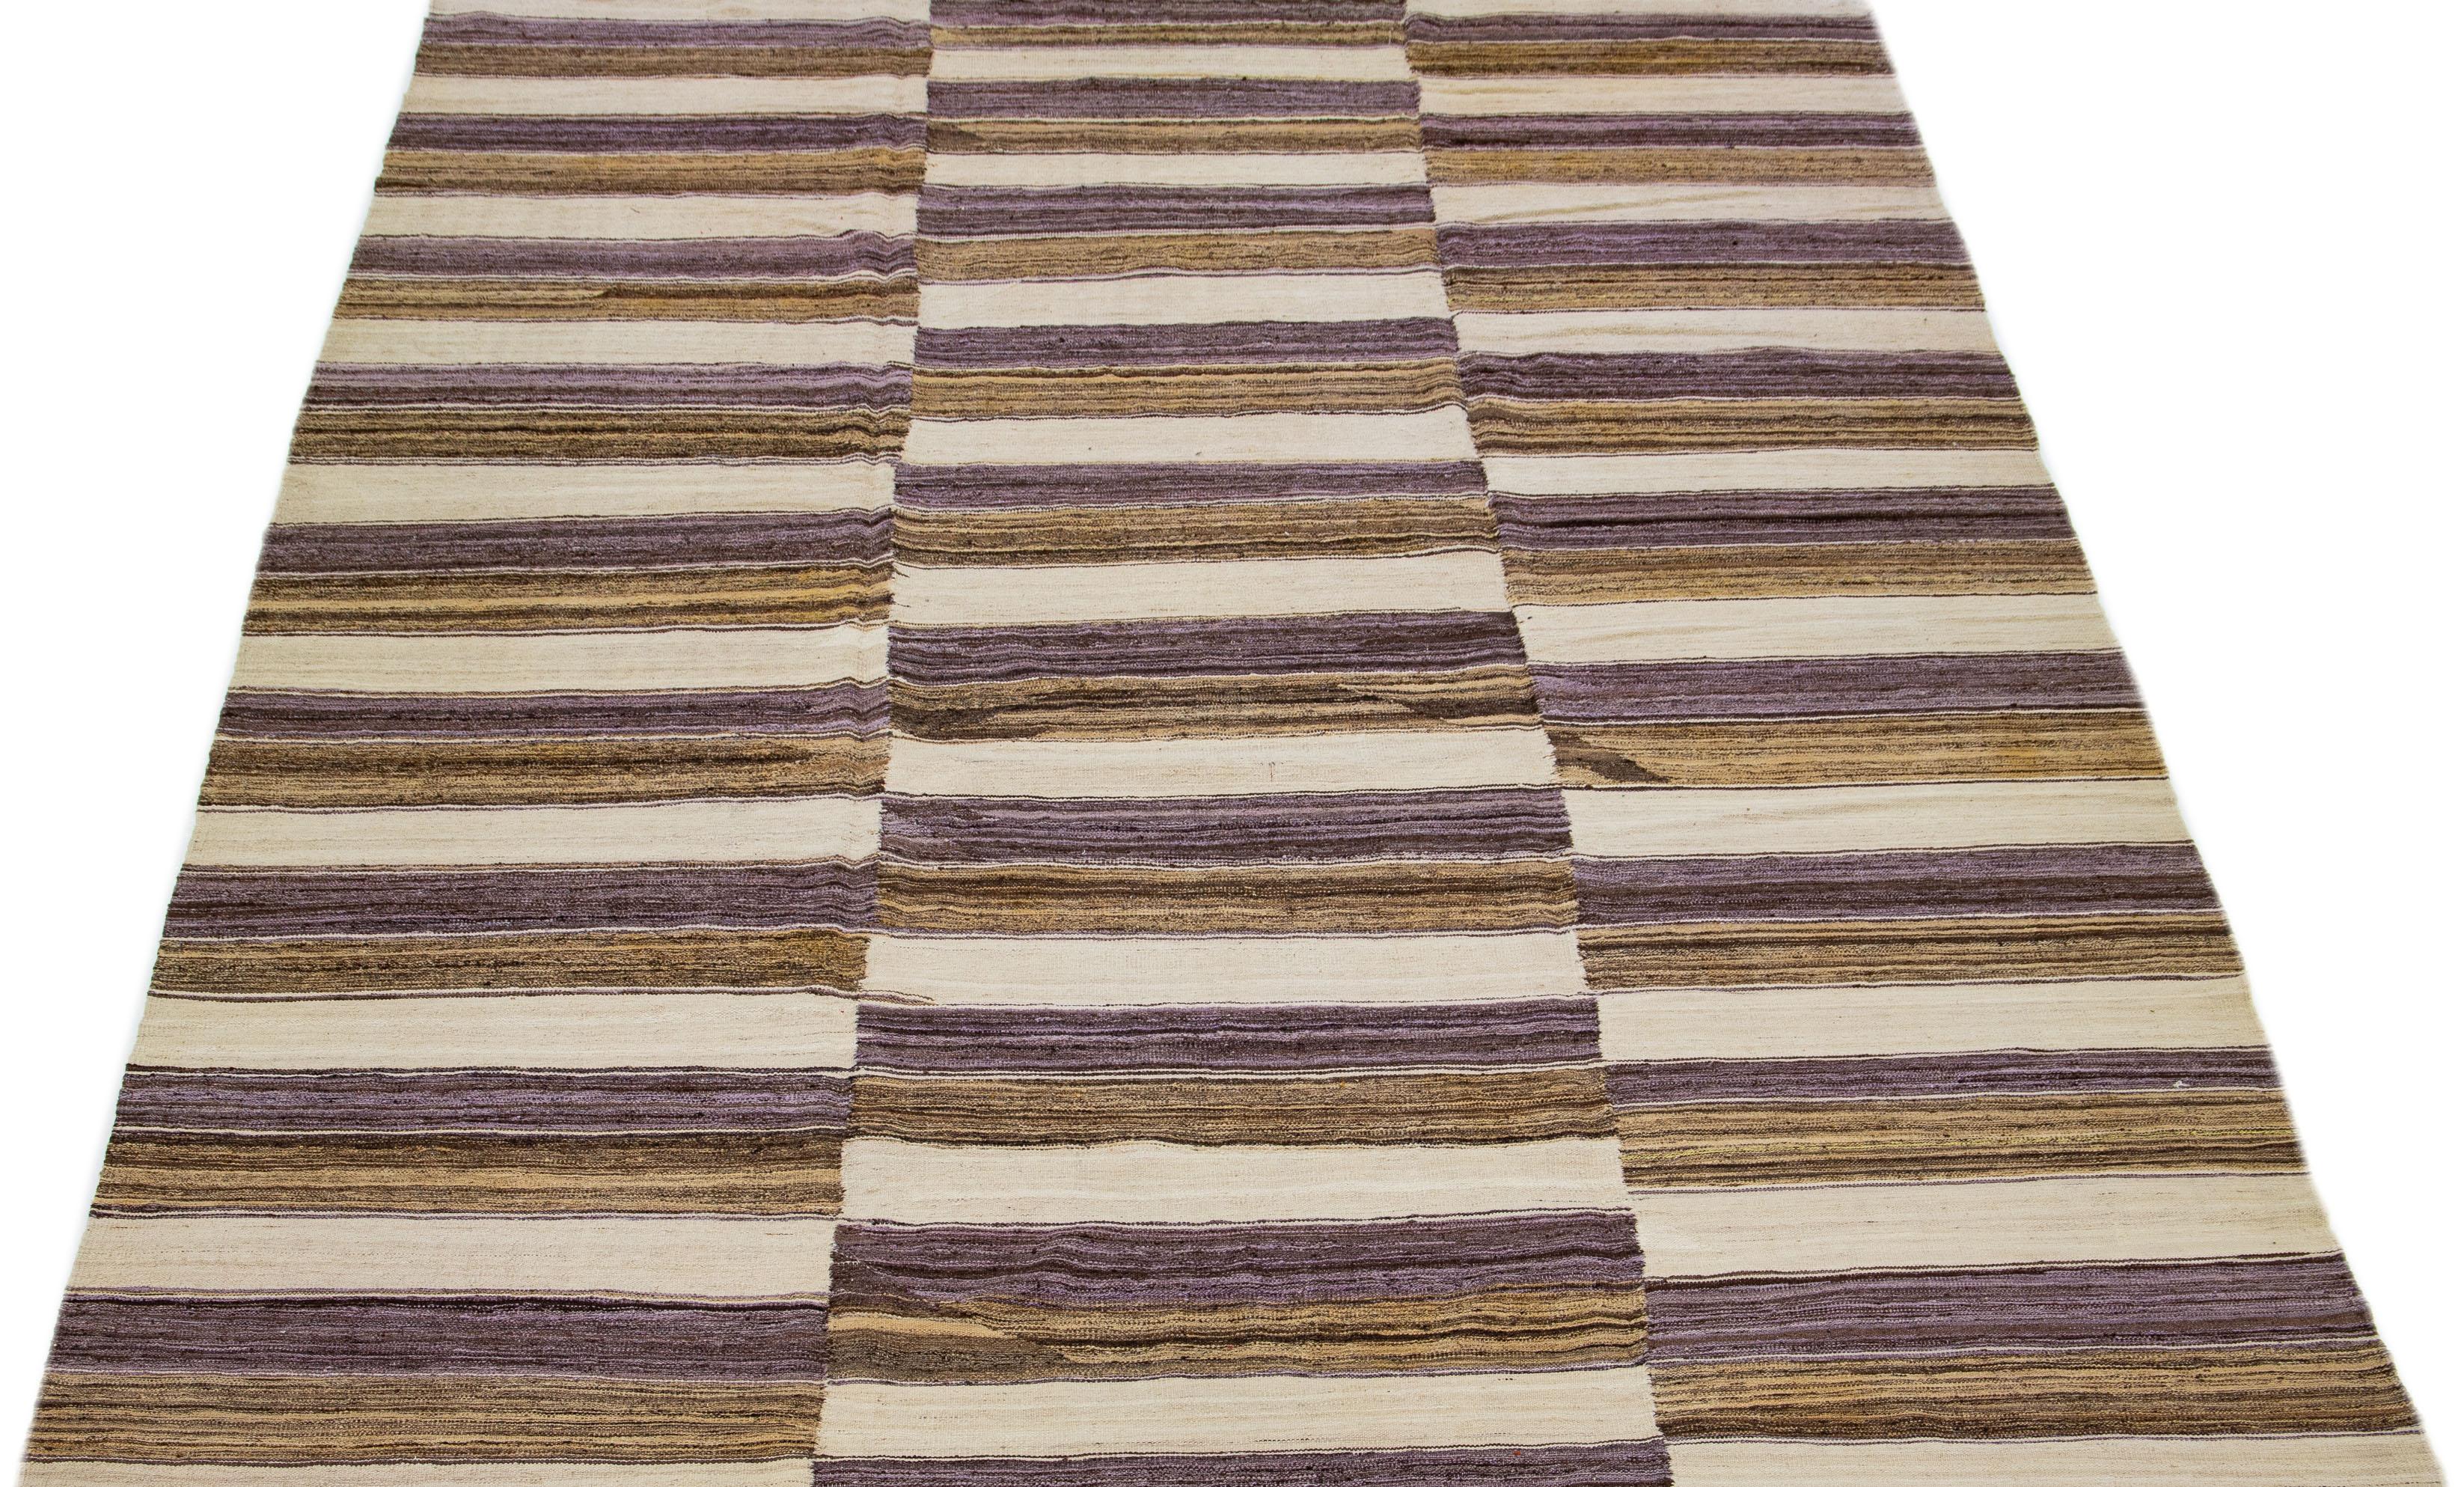 This contemporary kilim wool rug showcases a detailed and lively stripe design incorporating shades of beige, brown, and tan throughout.
This rug measures 10' x 13'10